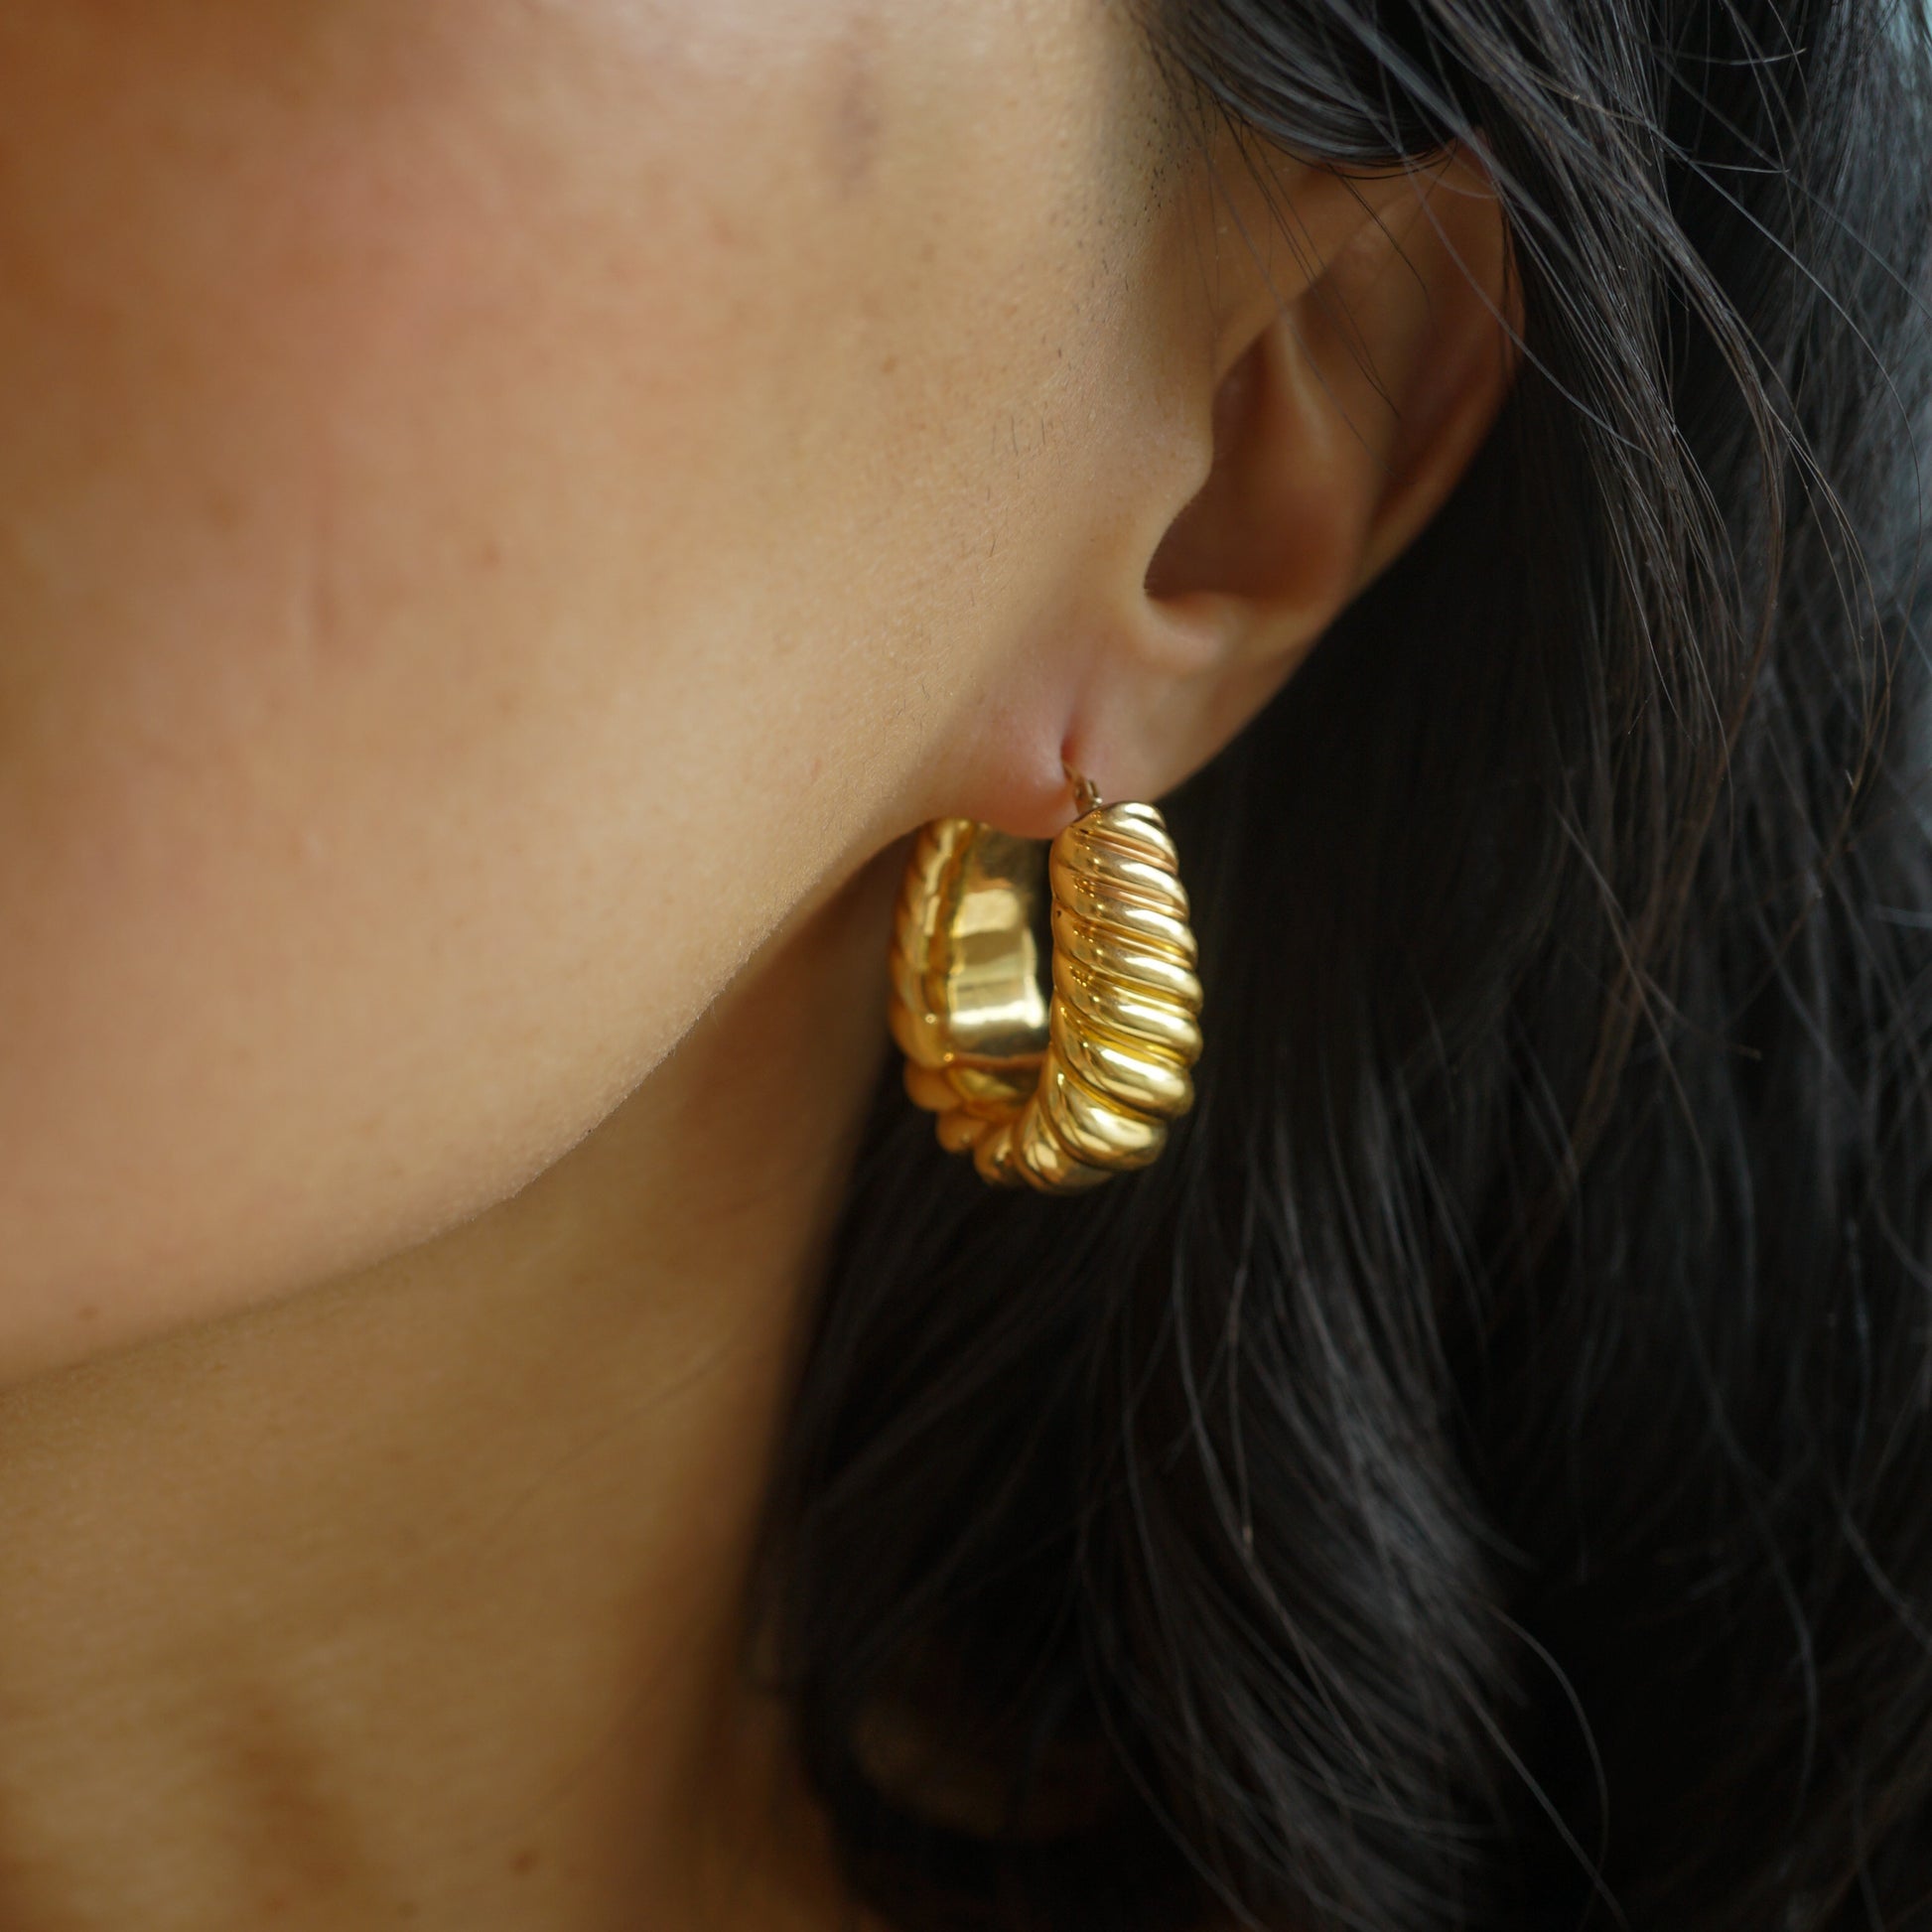 Rope Textured Hoop Earrings in 14k Yellow GoldComposition: 14 Karat Yellow Gold Total Gram Weight: 8.5 g Inscription: 14k MILOR ITALY
      